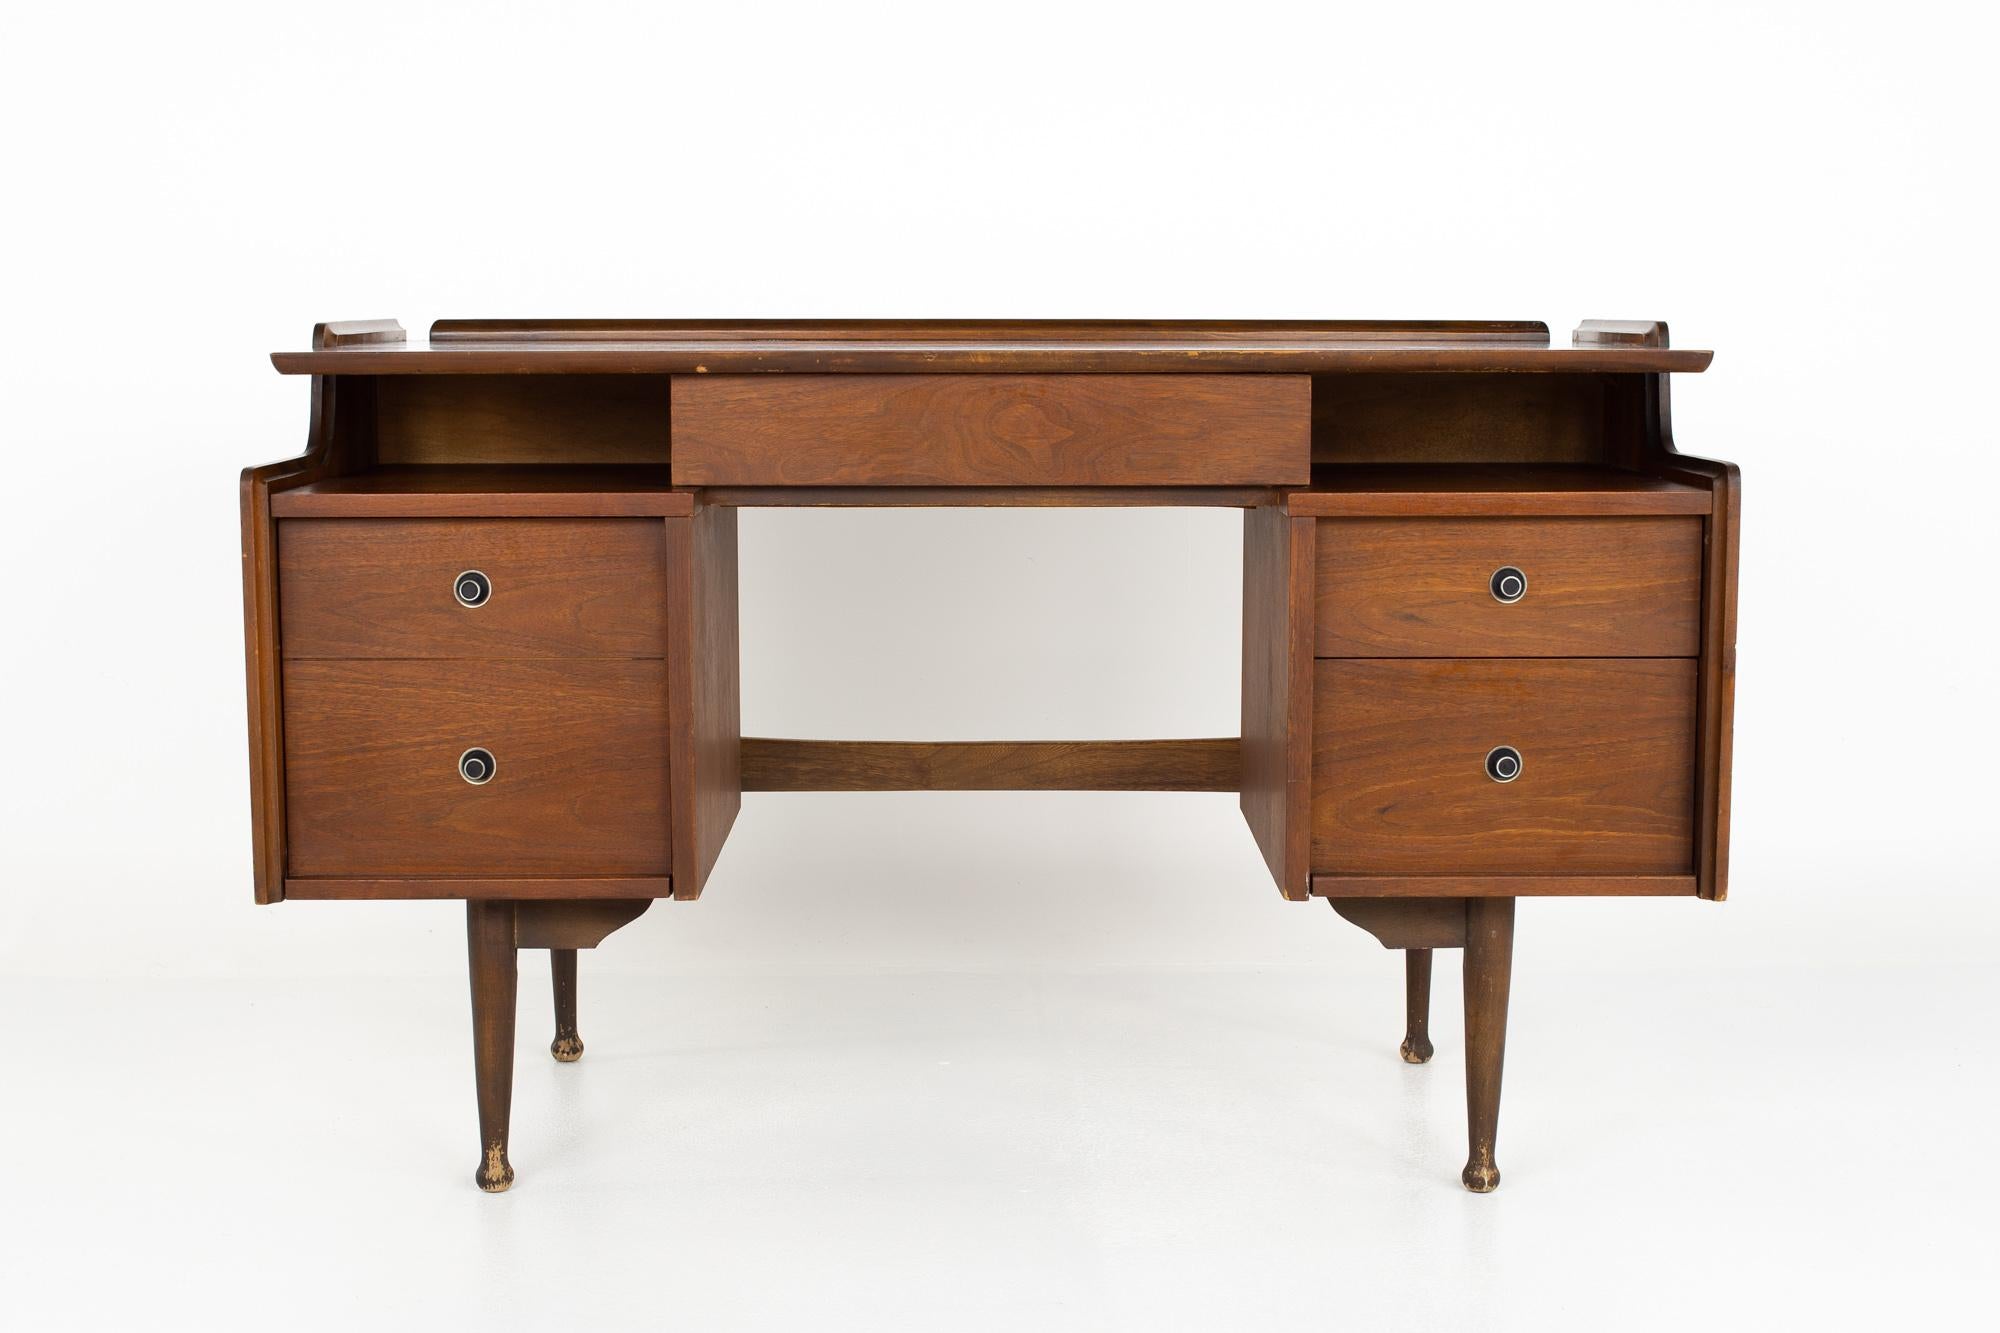 Mainline by Hooker Mid Century Walnut Double Pedestal Floating Top Desk

Desk measures: 50 wide x 26 deep x 30.5 inches high, with a chair clearance of 24.5 inches 

?All pieces of furniture can be had in what we call restored vintage condition.